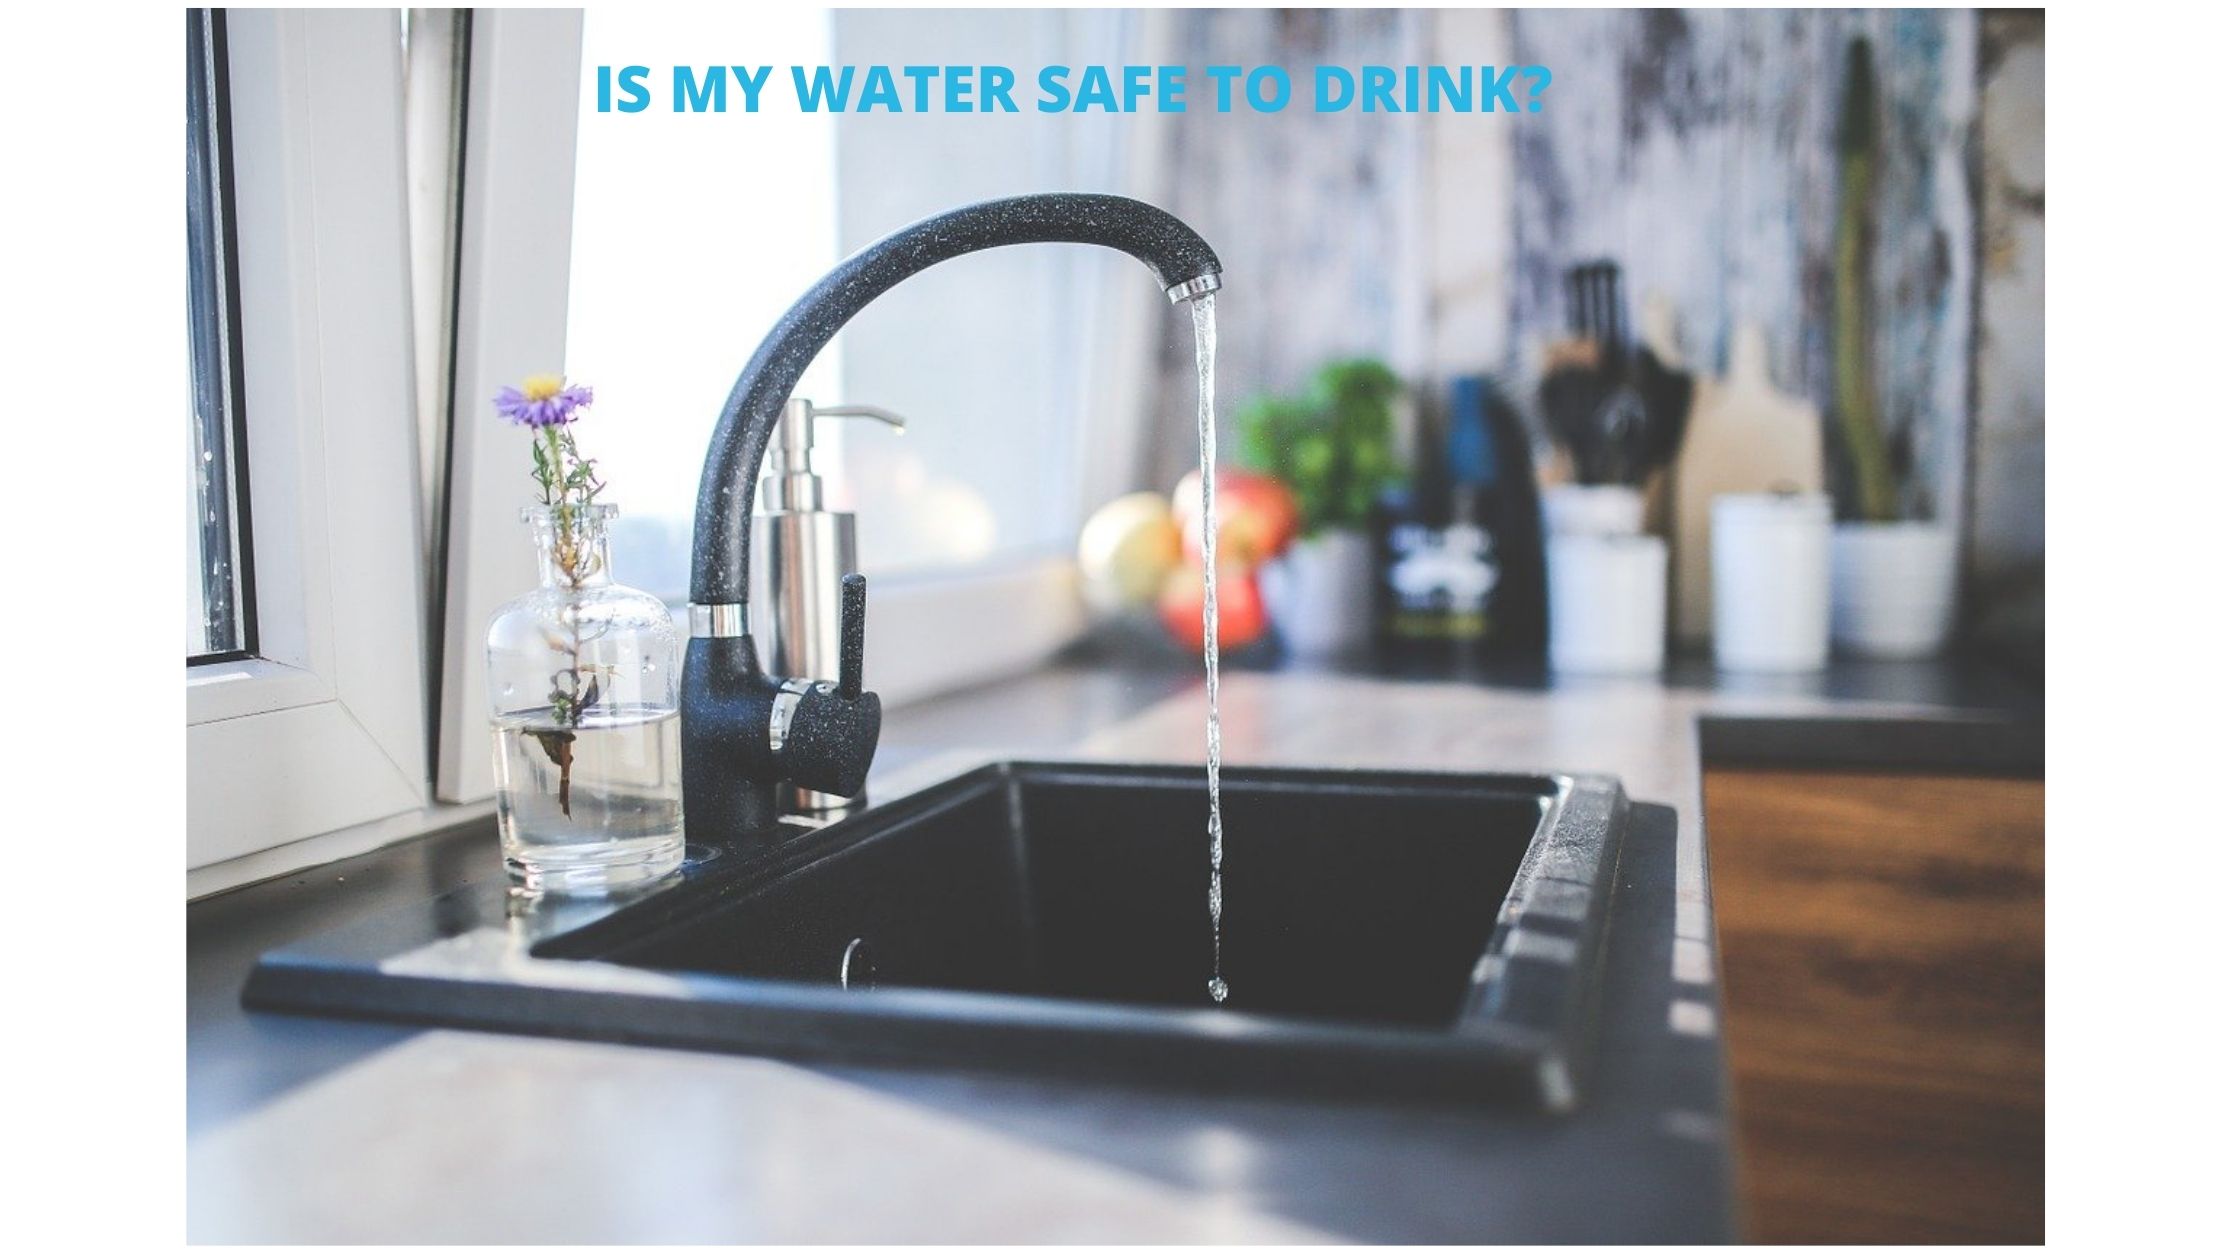 WHY SHOULD I TEST MY HOME WATER?